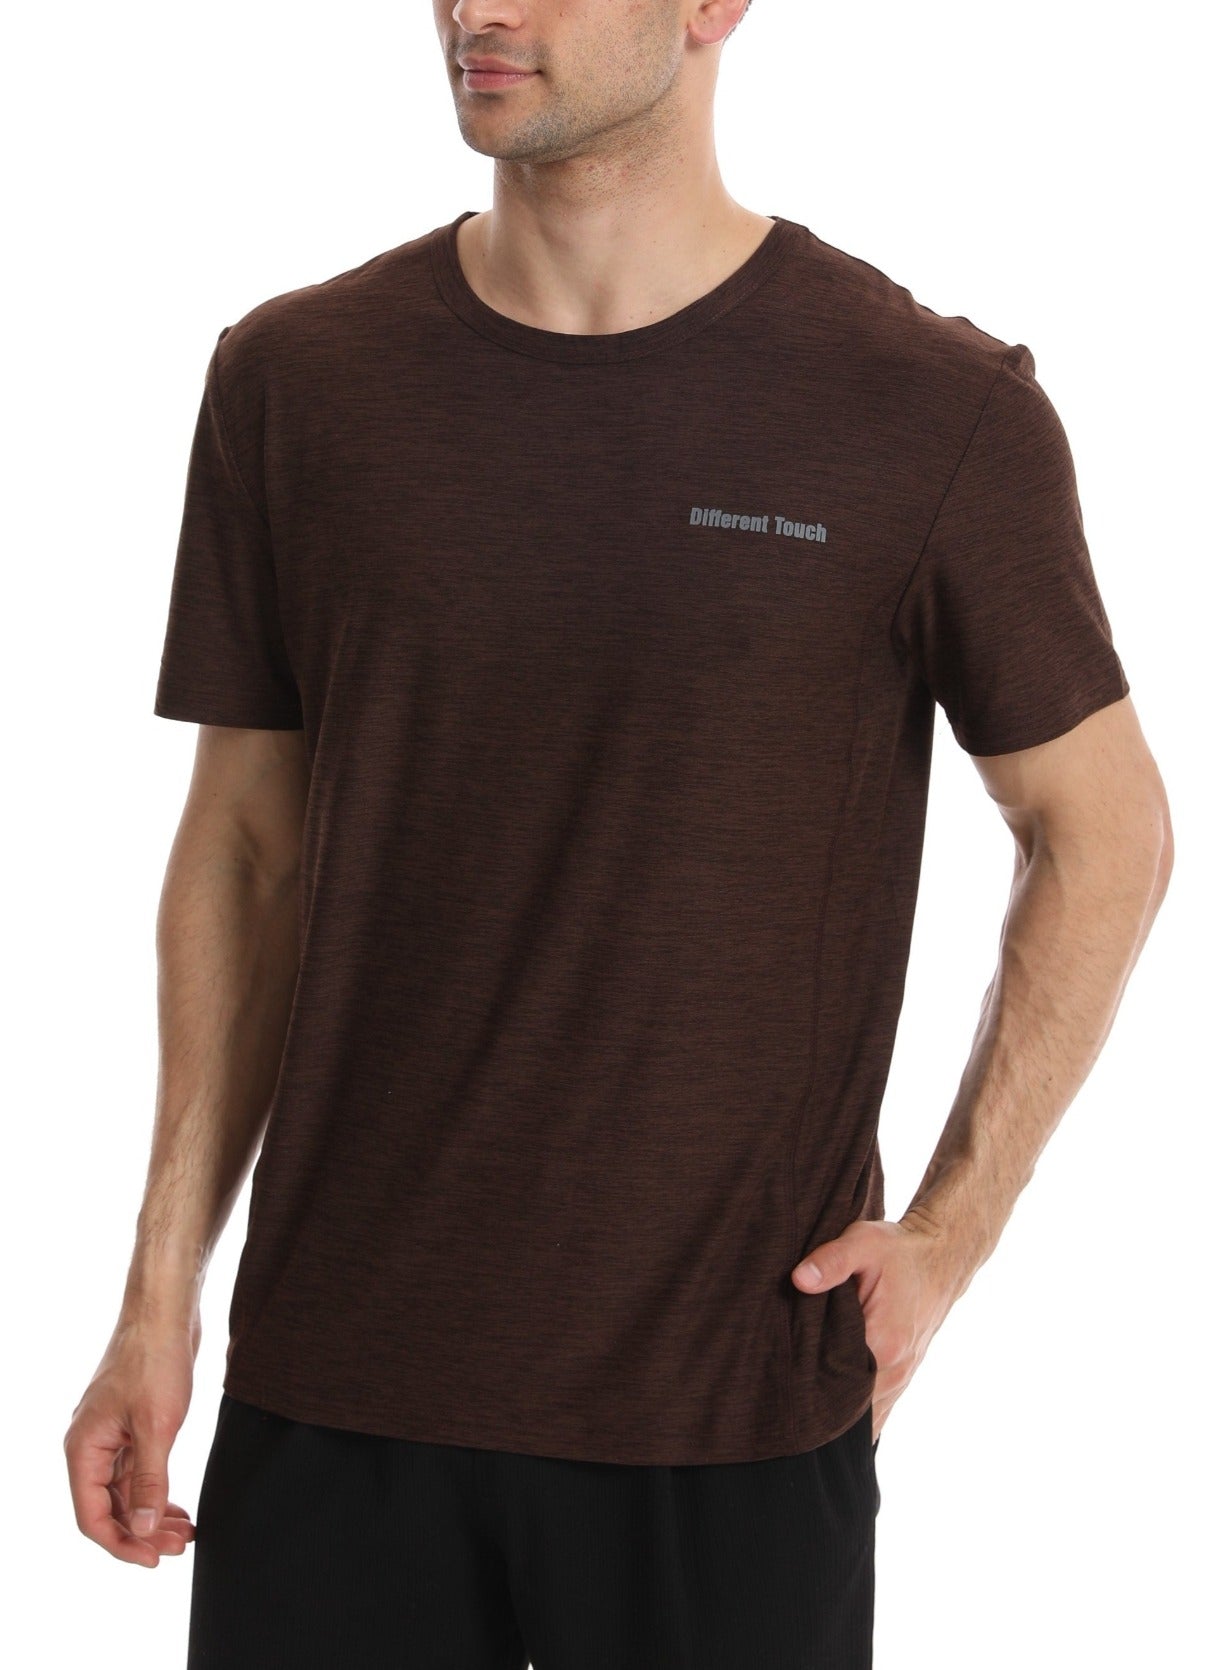 Crew Neck Short Sleeve T-Shirts | Active Workout Quick Dry | Men’s